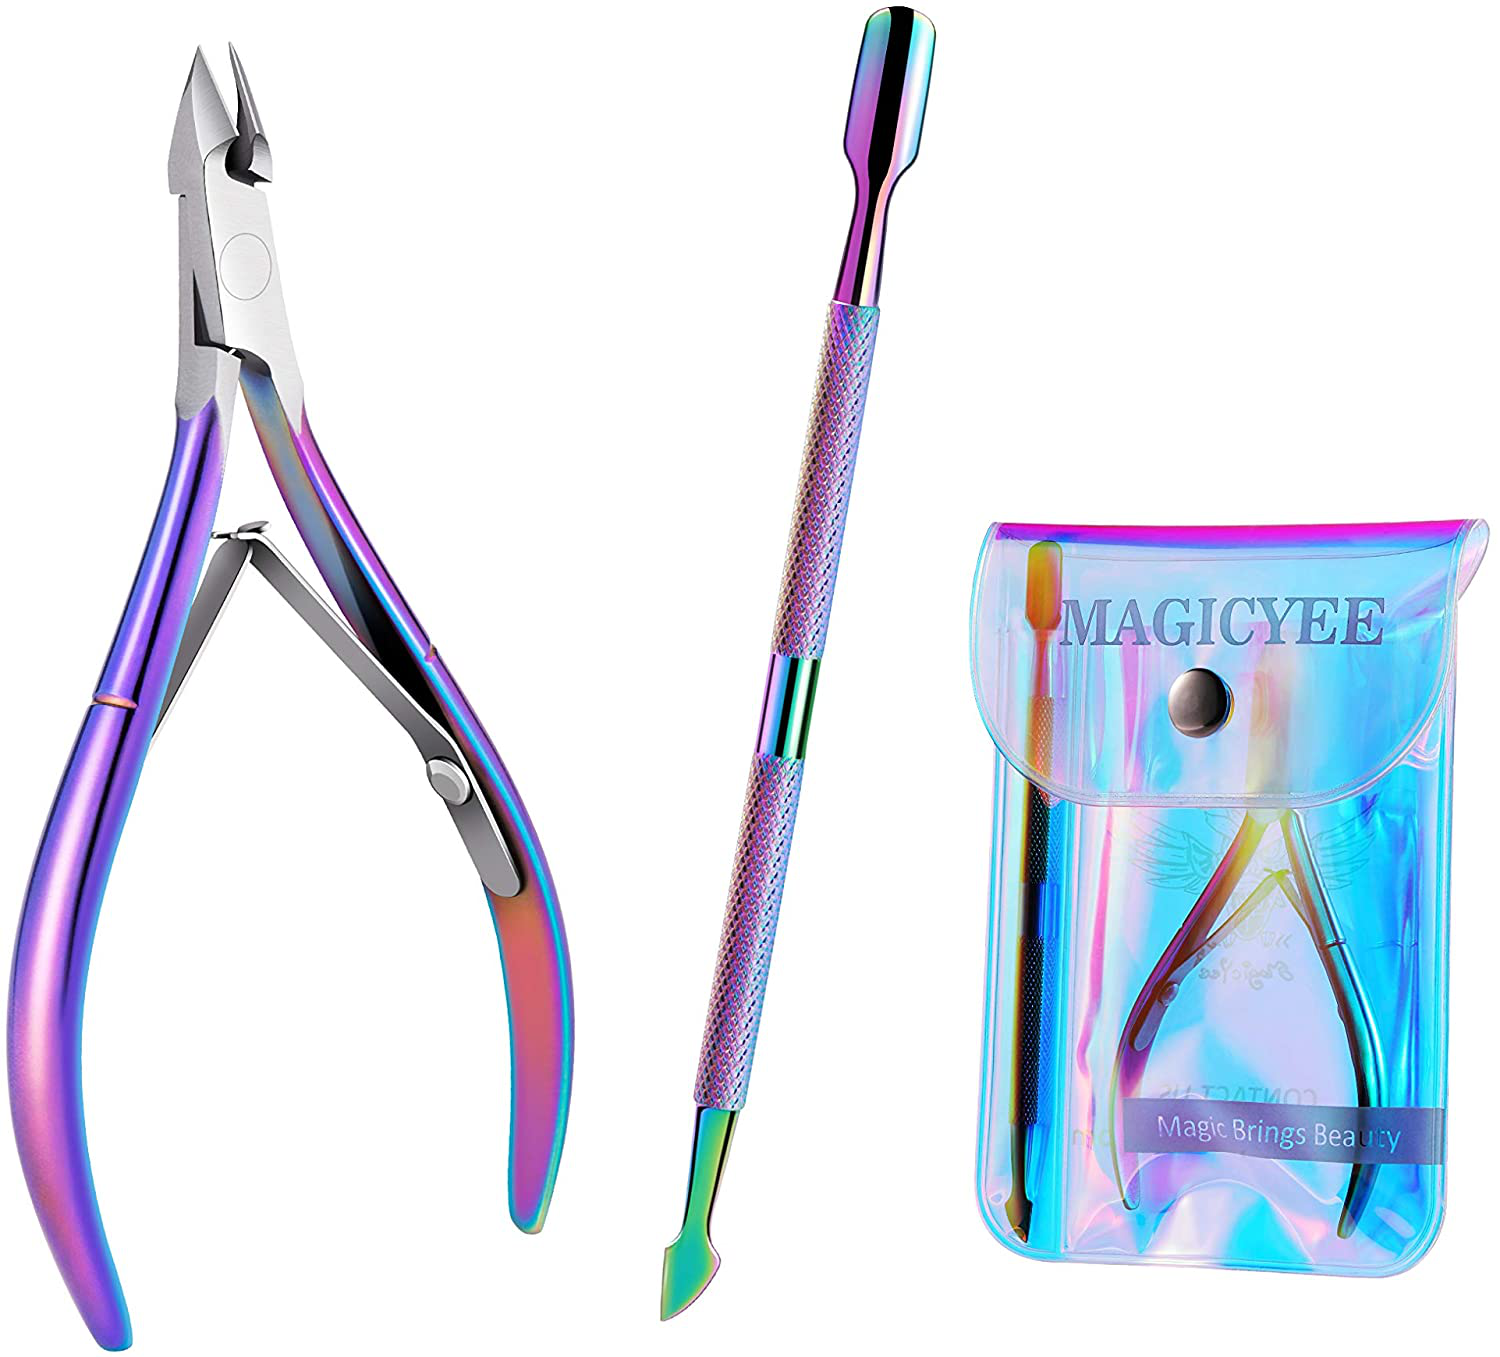 Cuticle Trimmer with Cuticle Pusher - Magicyee Chameleon Cuticle Cutter Cuticle Nipper Professional Cuticle Remover Valued Manicure Tools Set Dead Skin Remover Cuticle Clippers Best Gift